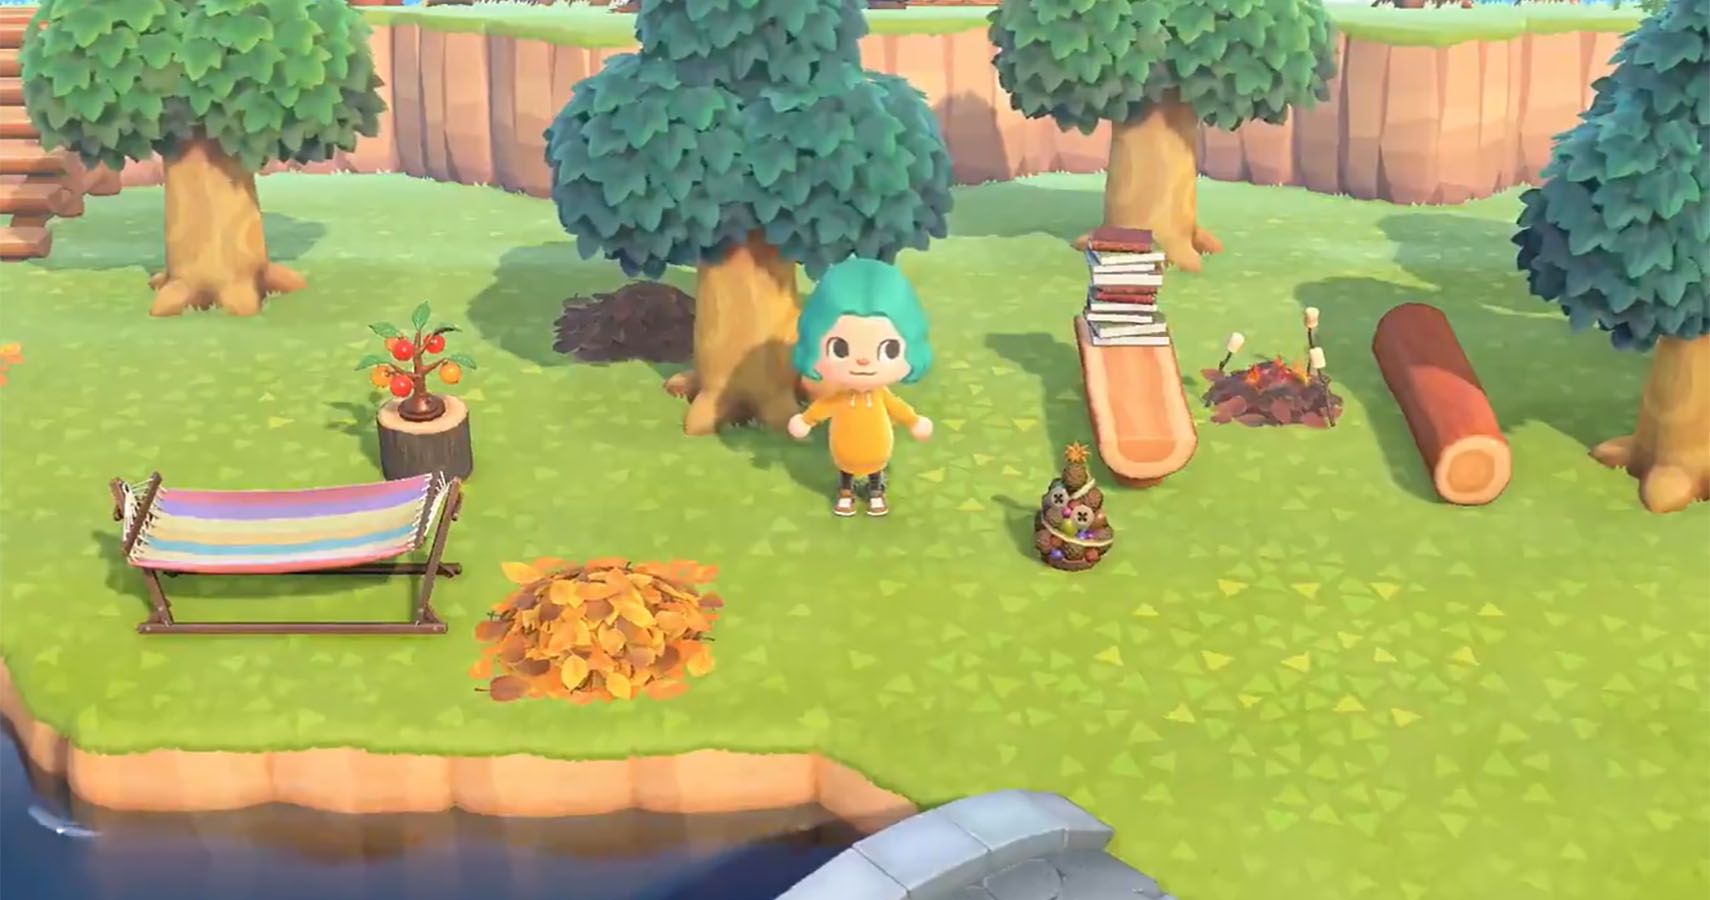 Animal Crossing's Isabelle showing off the autumn update.